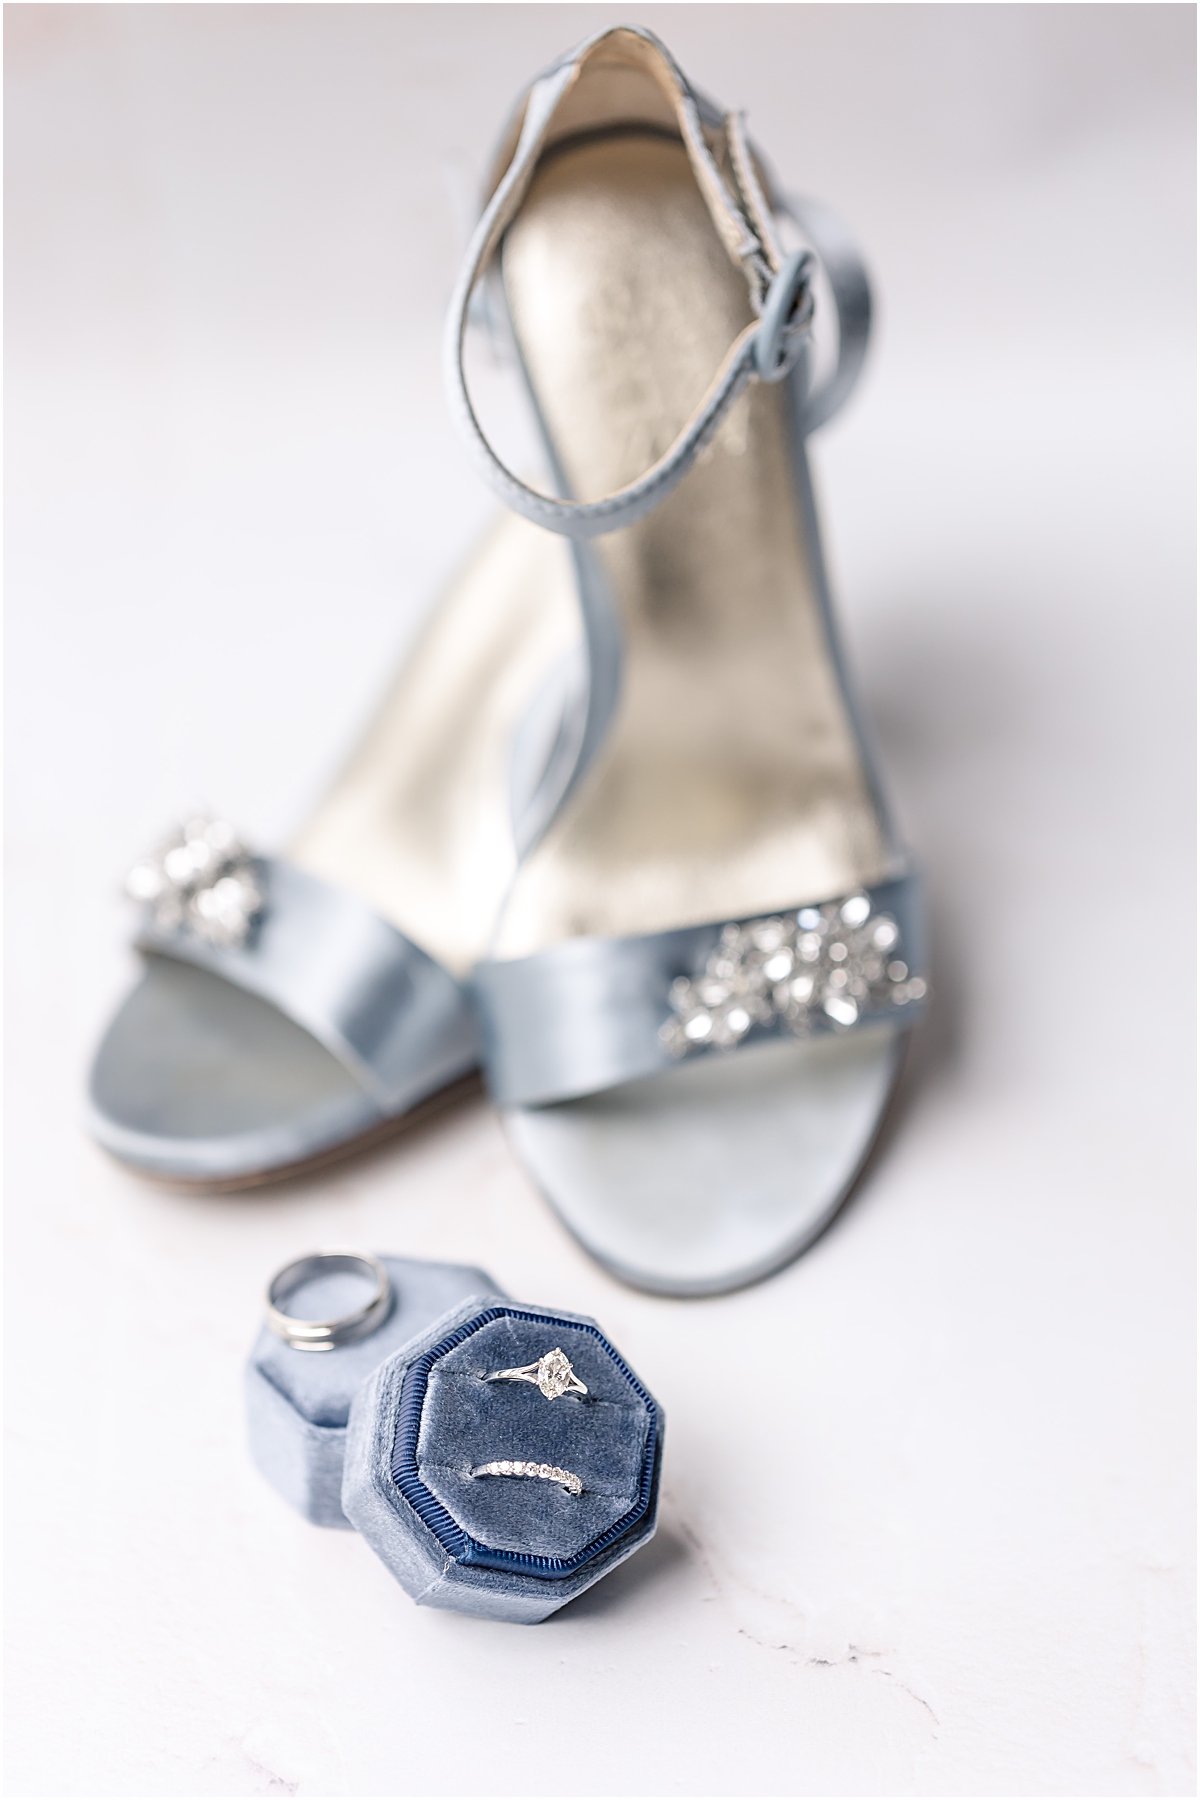 bridal detail photo of blue sandal wedding shoes with rhinestones on them and the wedding rings in a matching blue ring box 